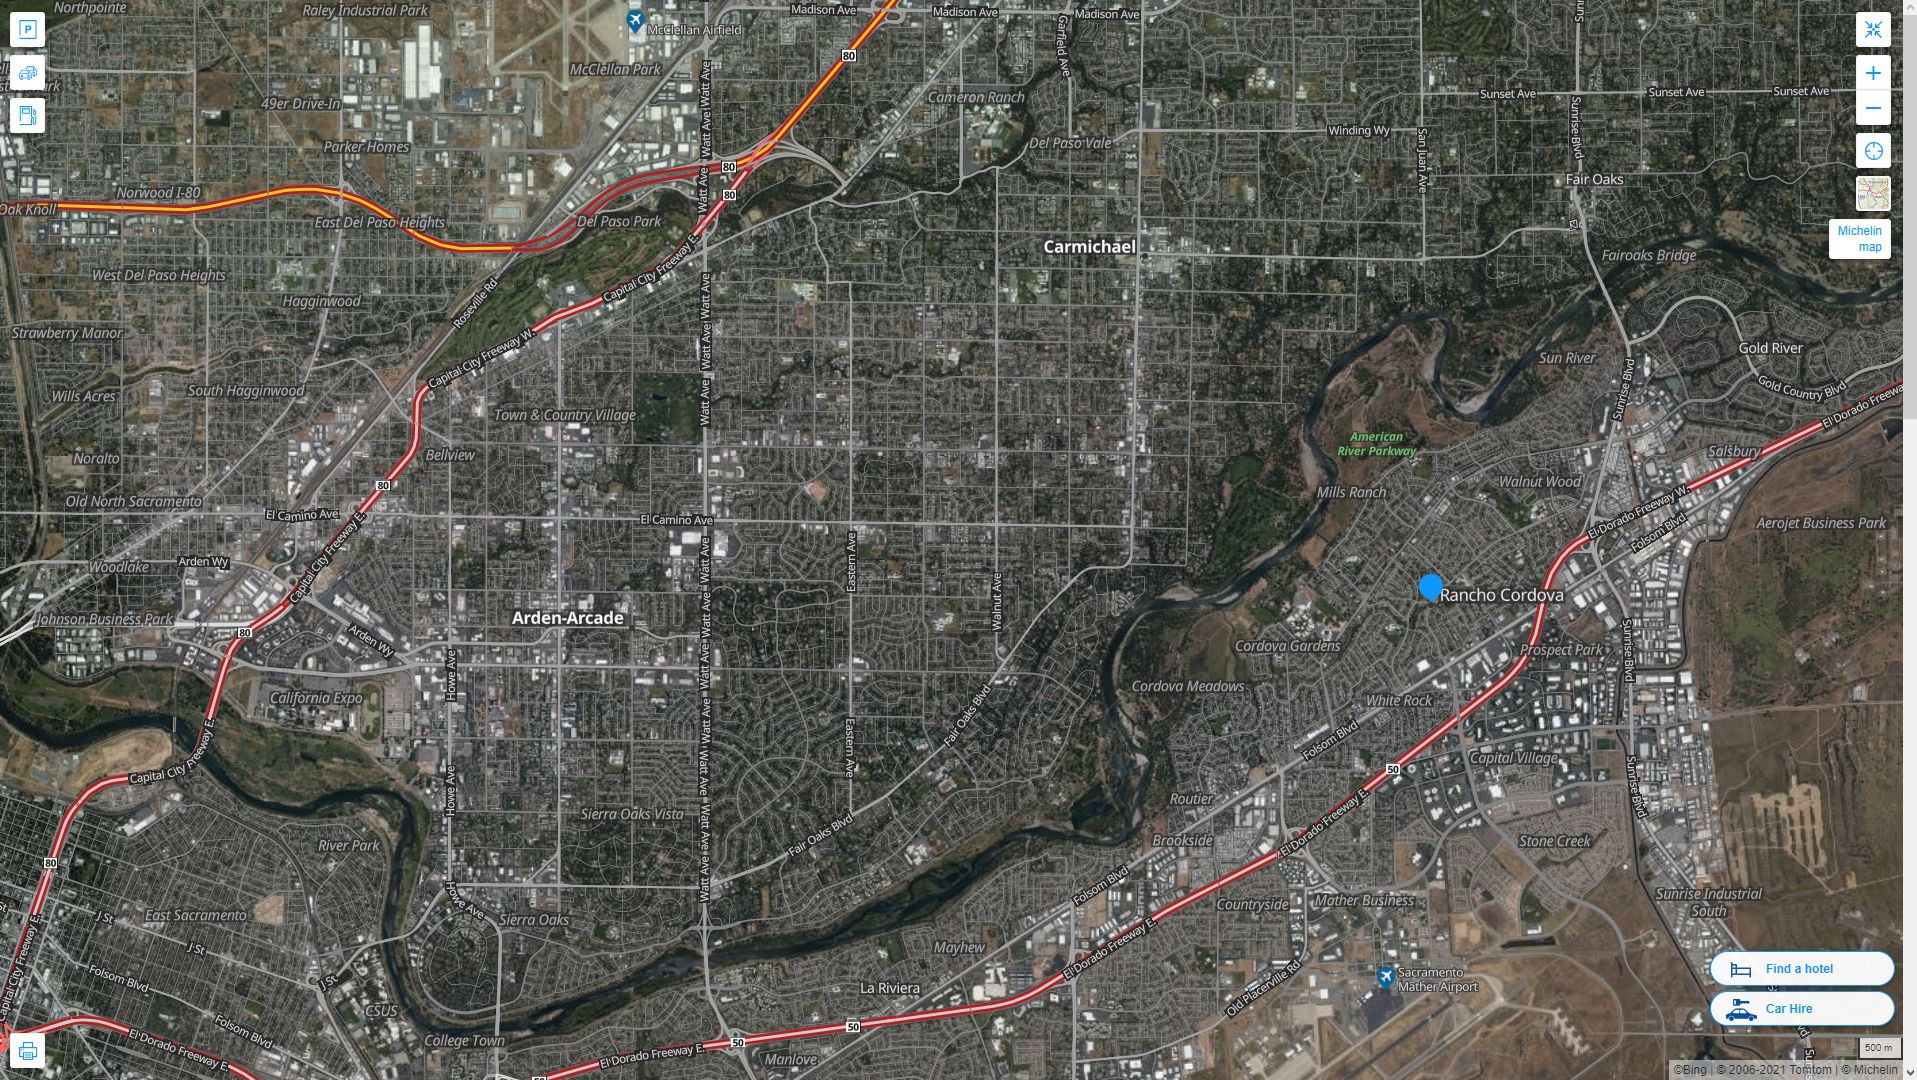 Rancho Cordova California Highway and Road Map with Satellite View